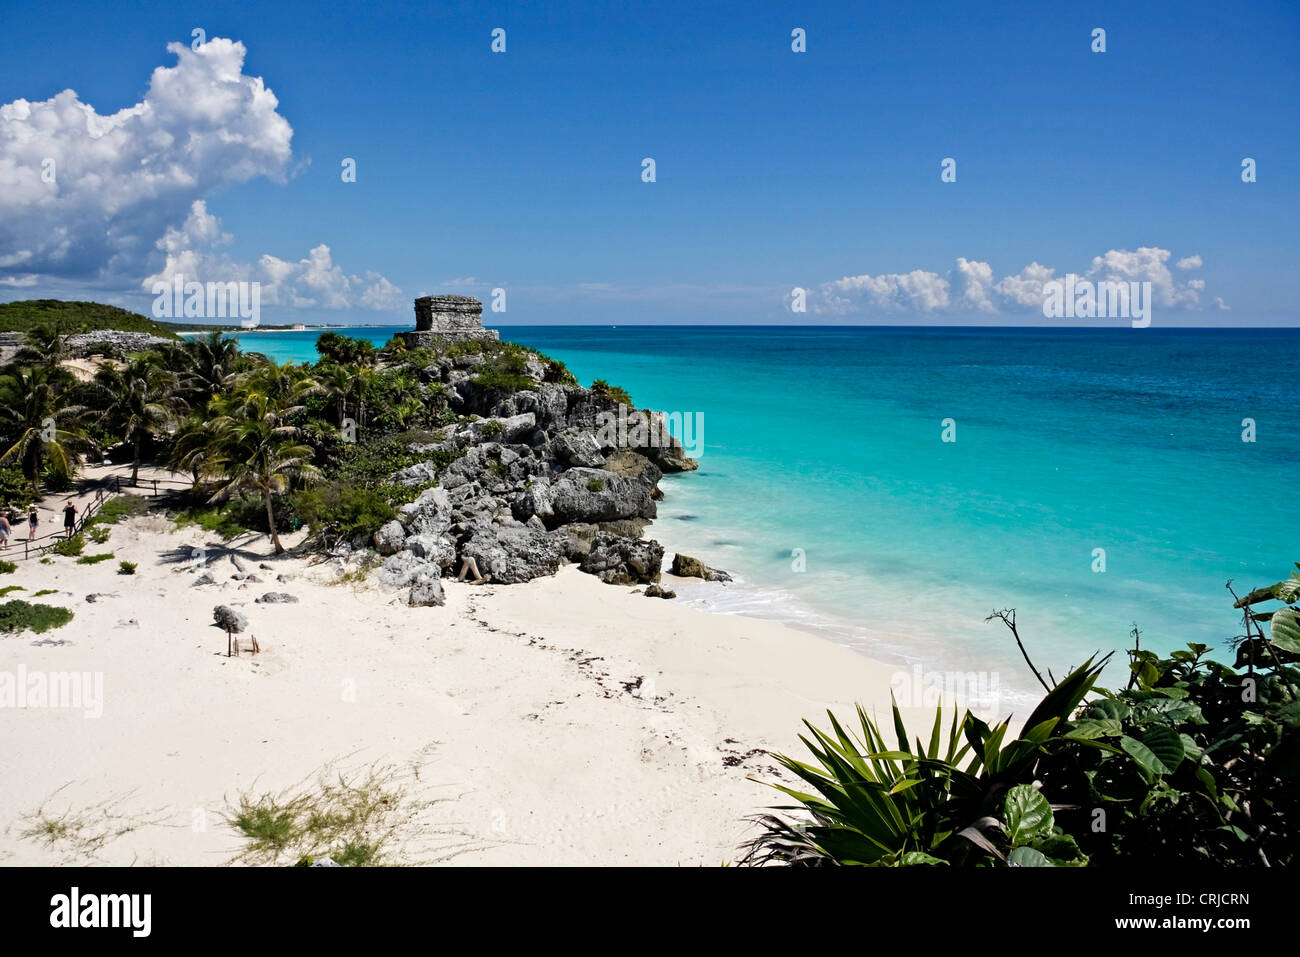 Portrait photo of the beach at Tulum, Mexico, on a sunny day. Stock Photo